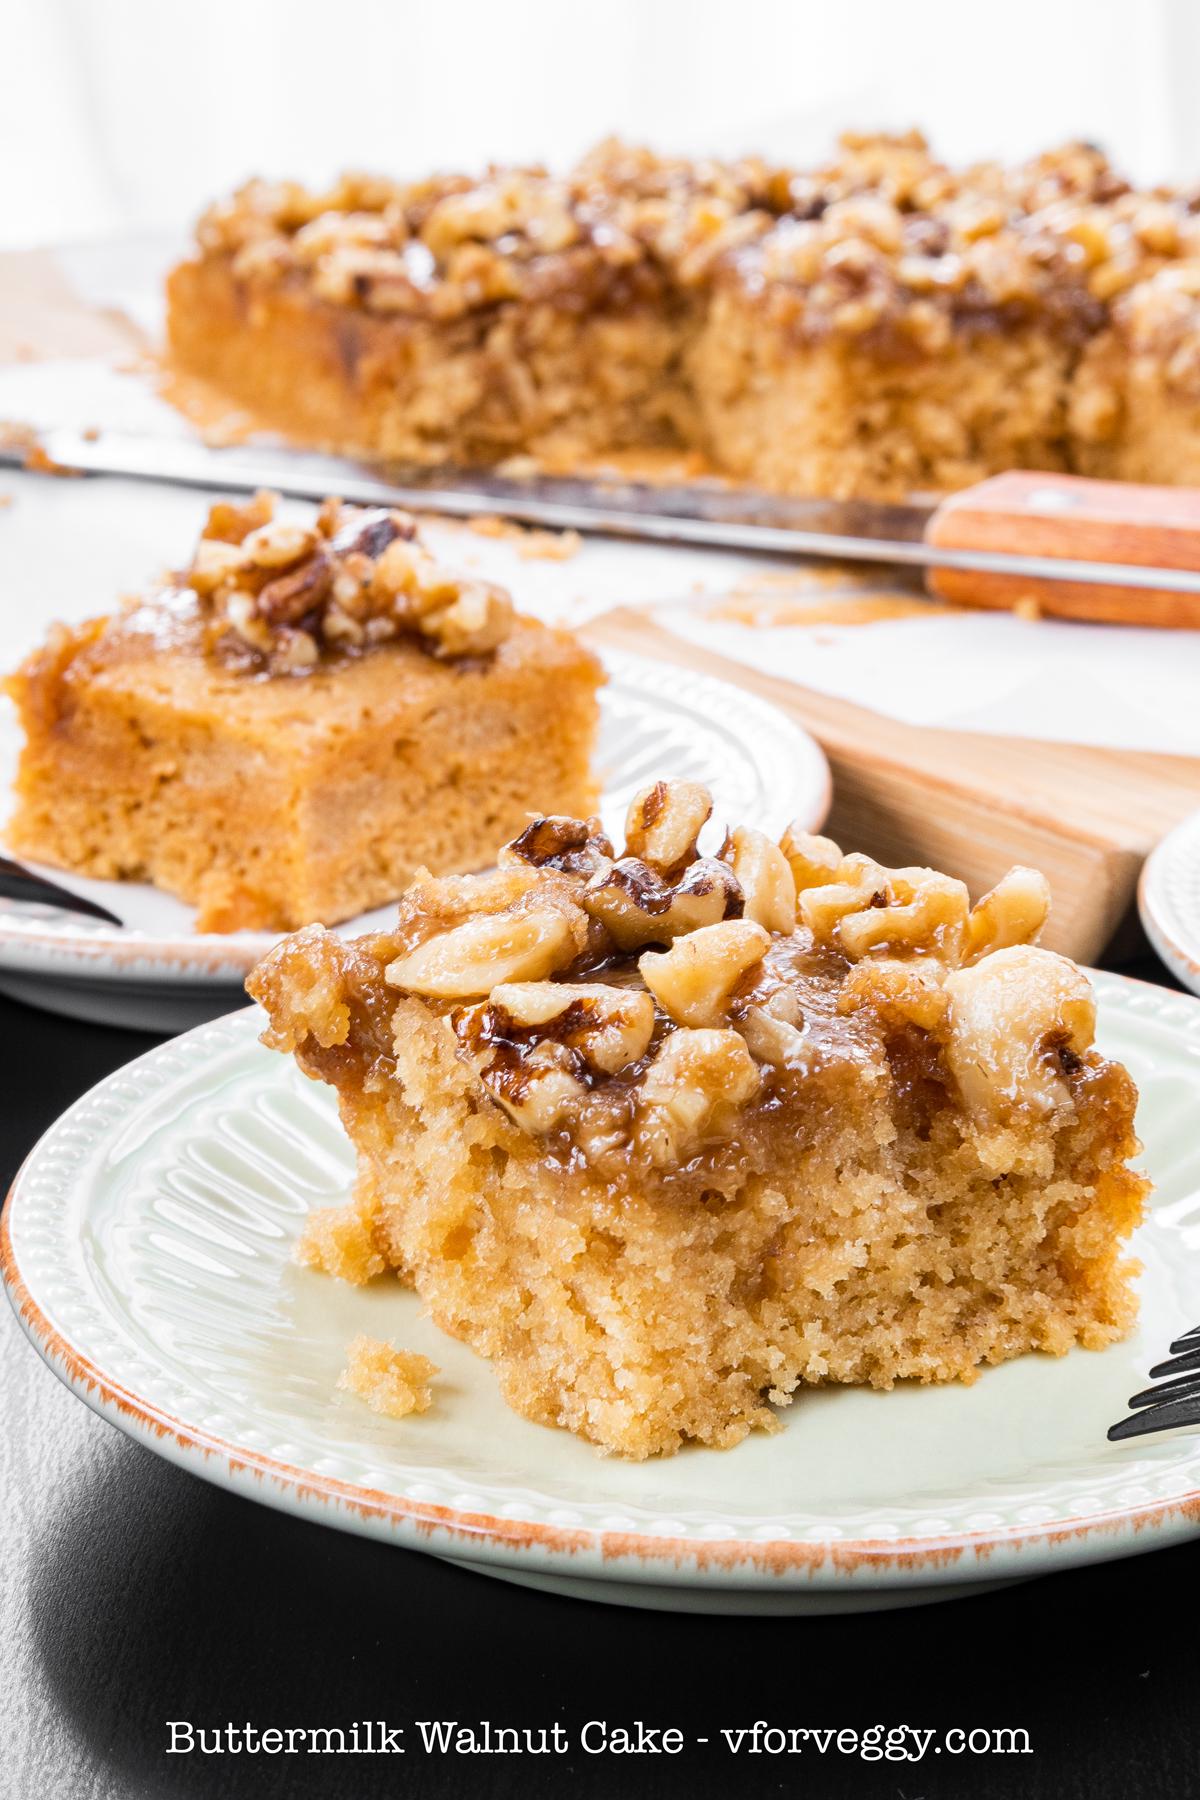 Buttermilk cake, with a caramel walnut topping.